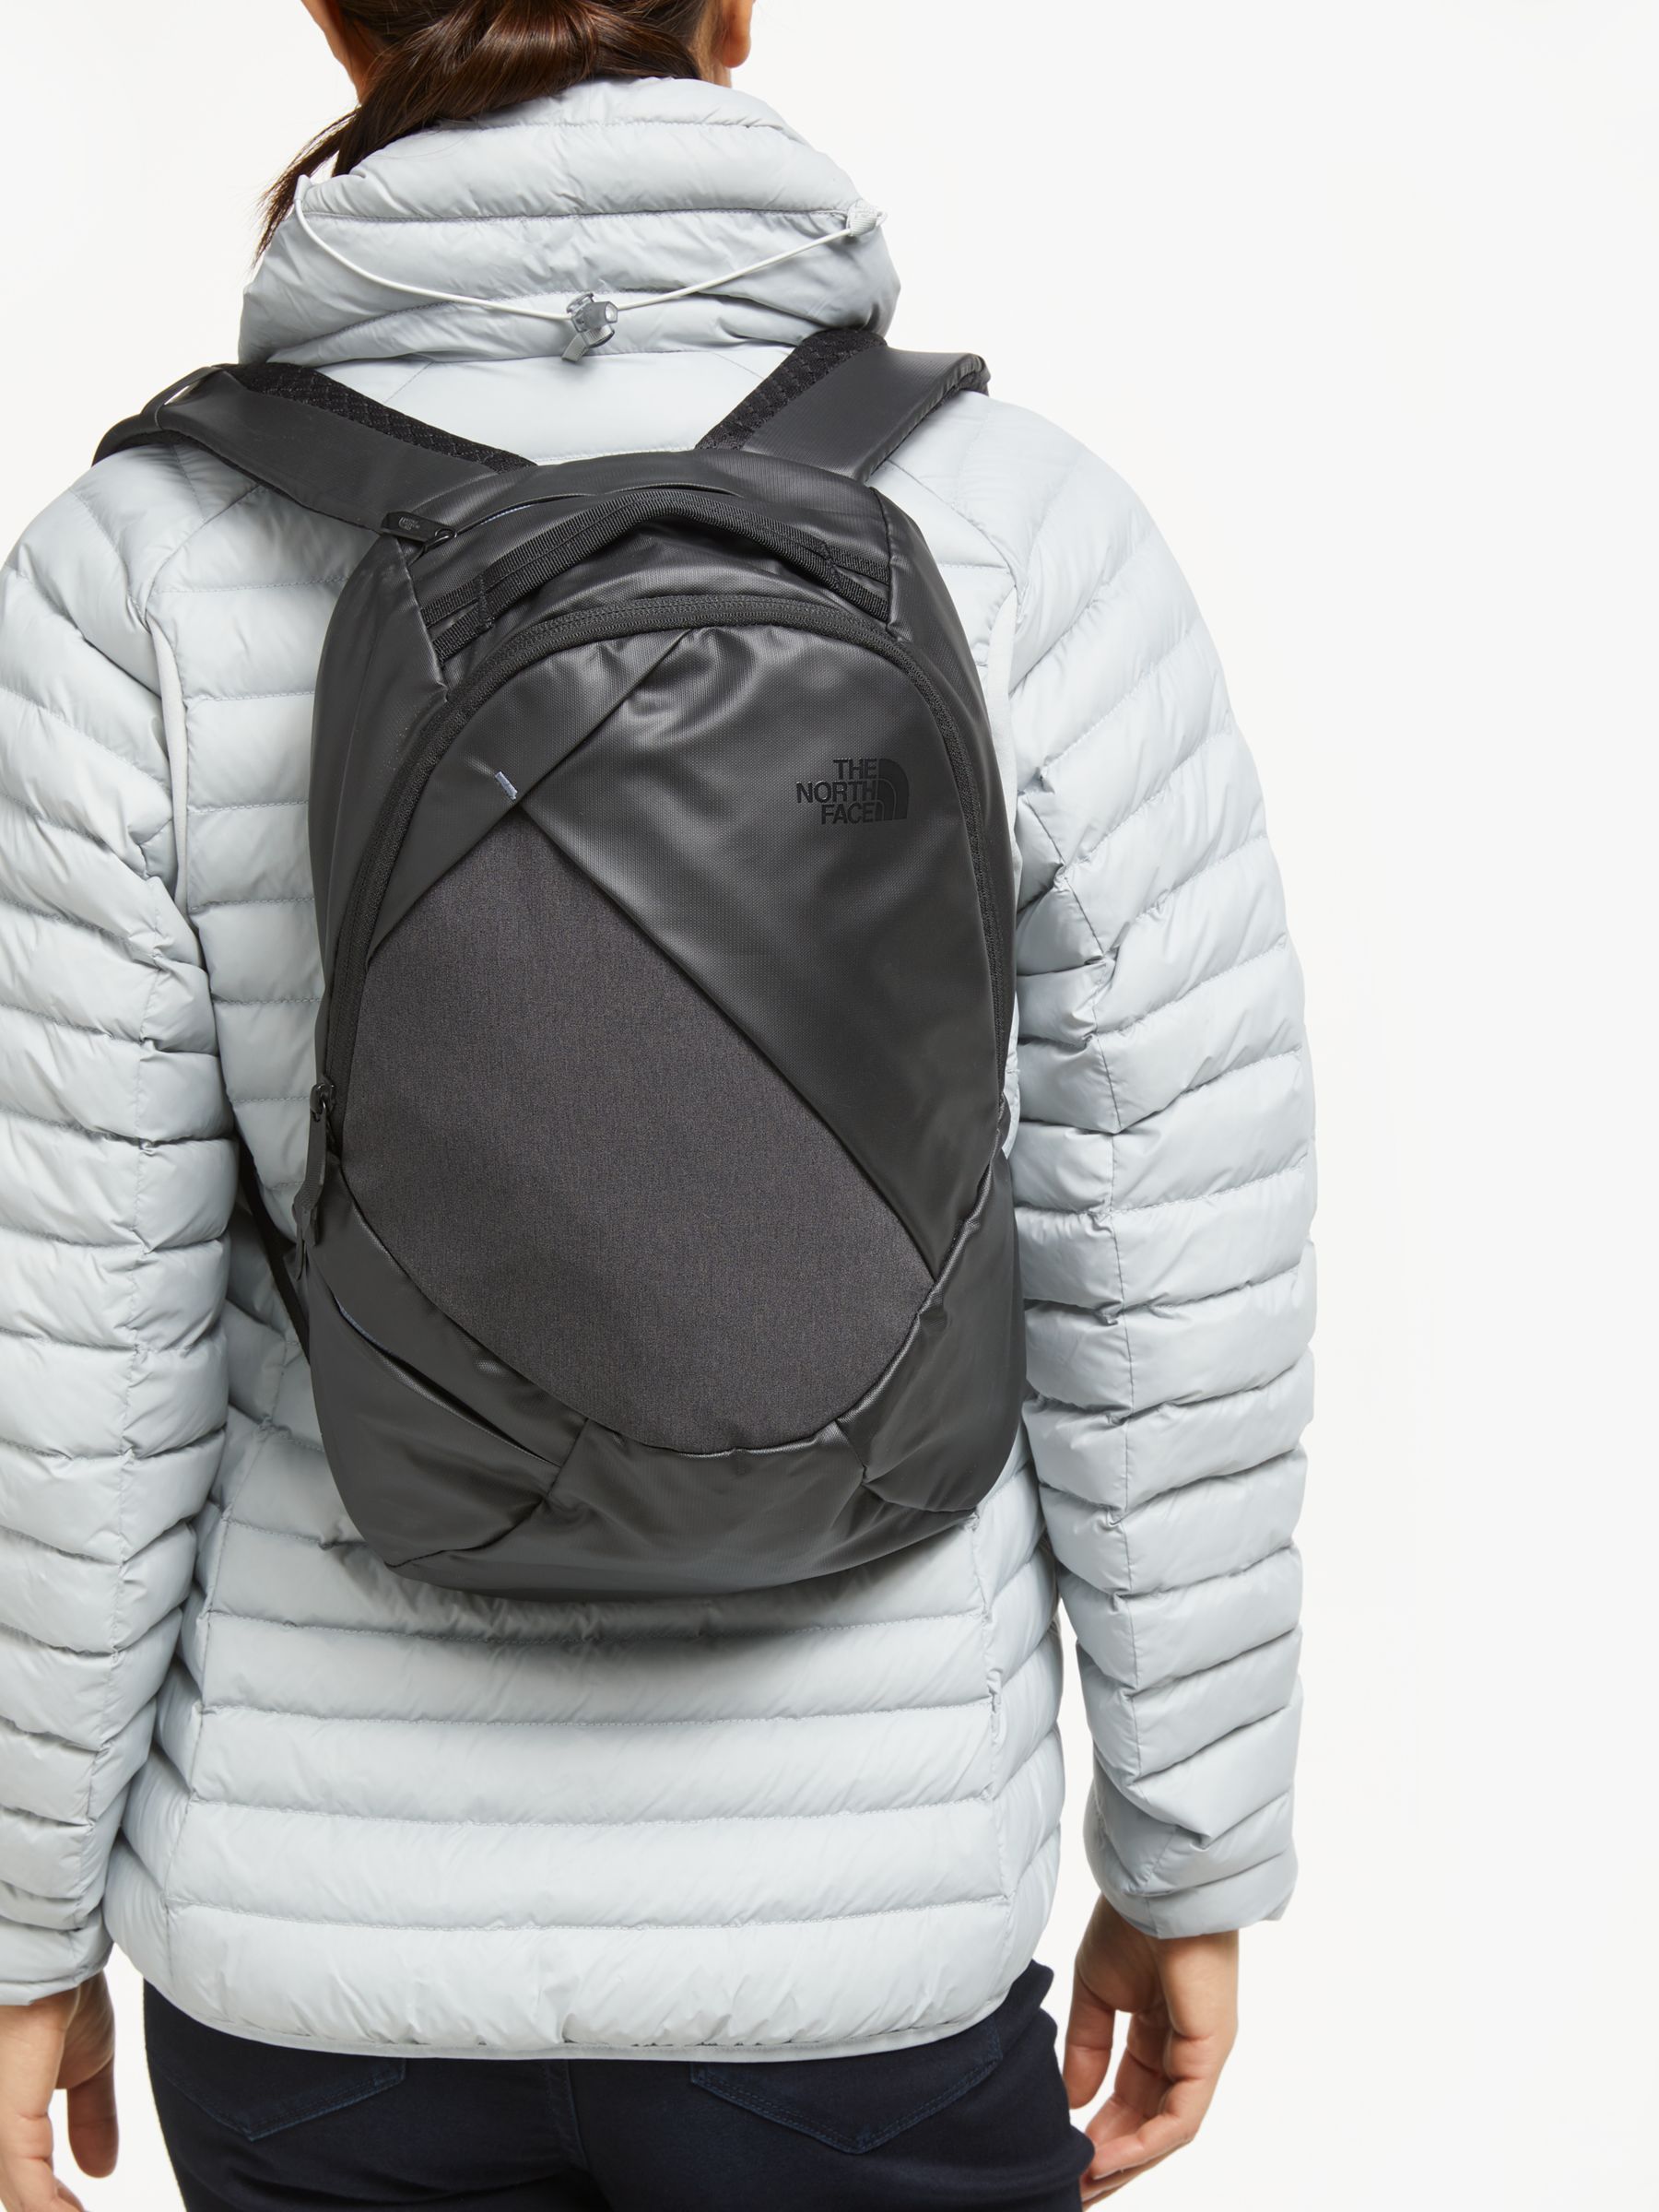 Uncia north face electra backpack uk 